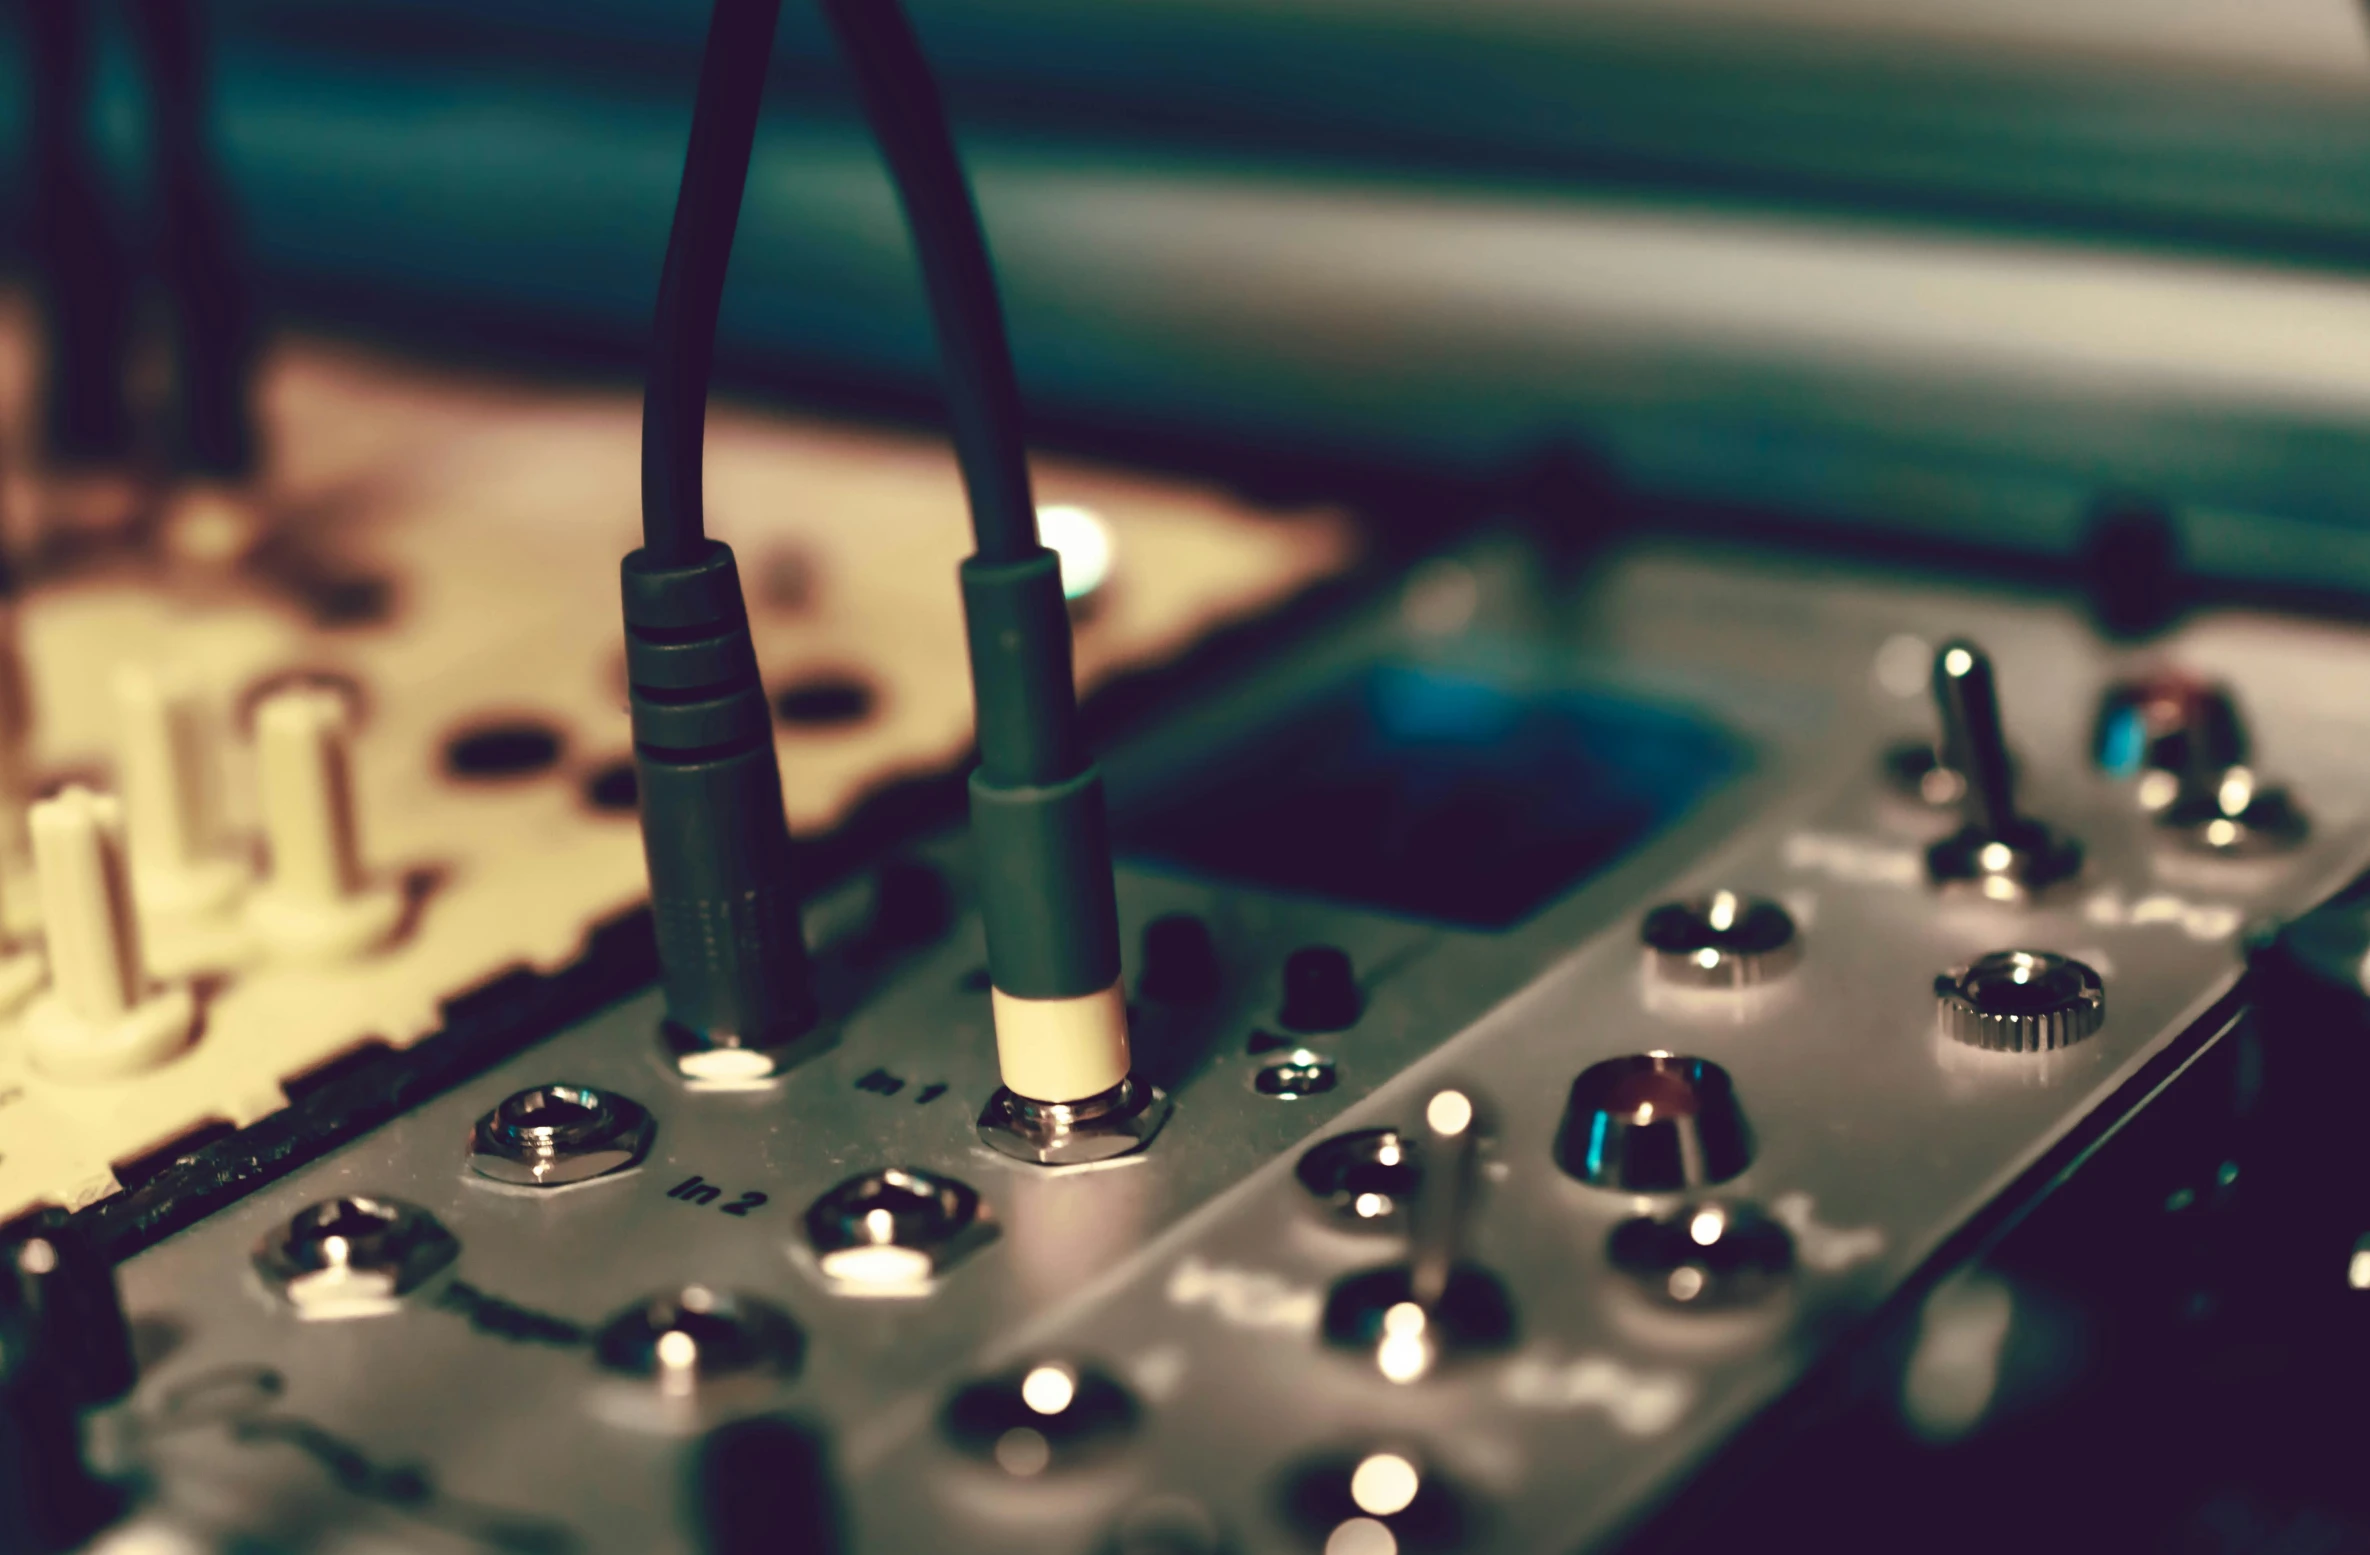 an analog mixing machine is running some electrical activity